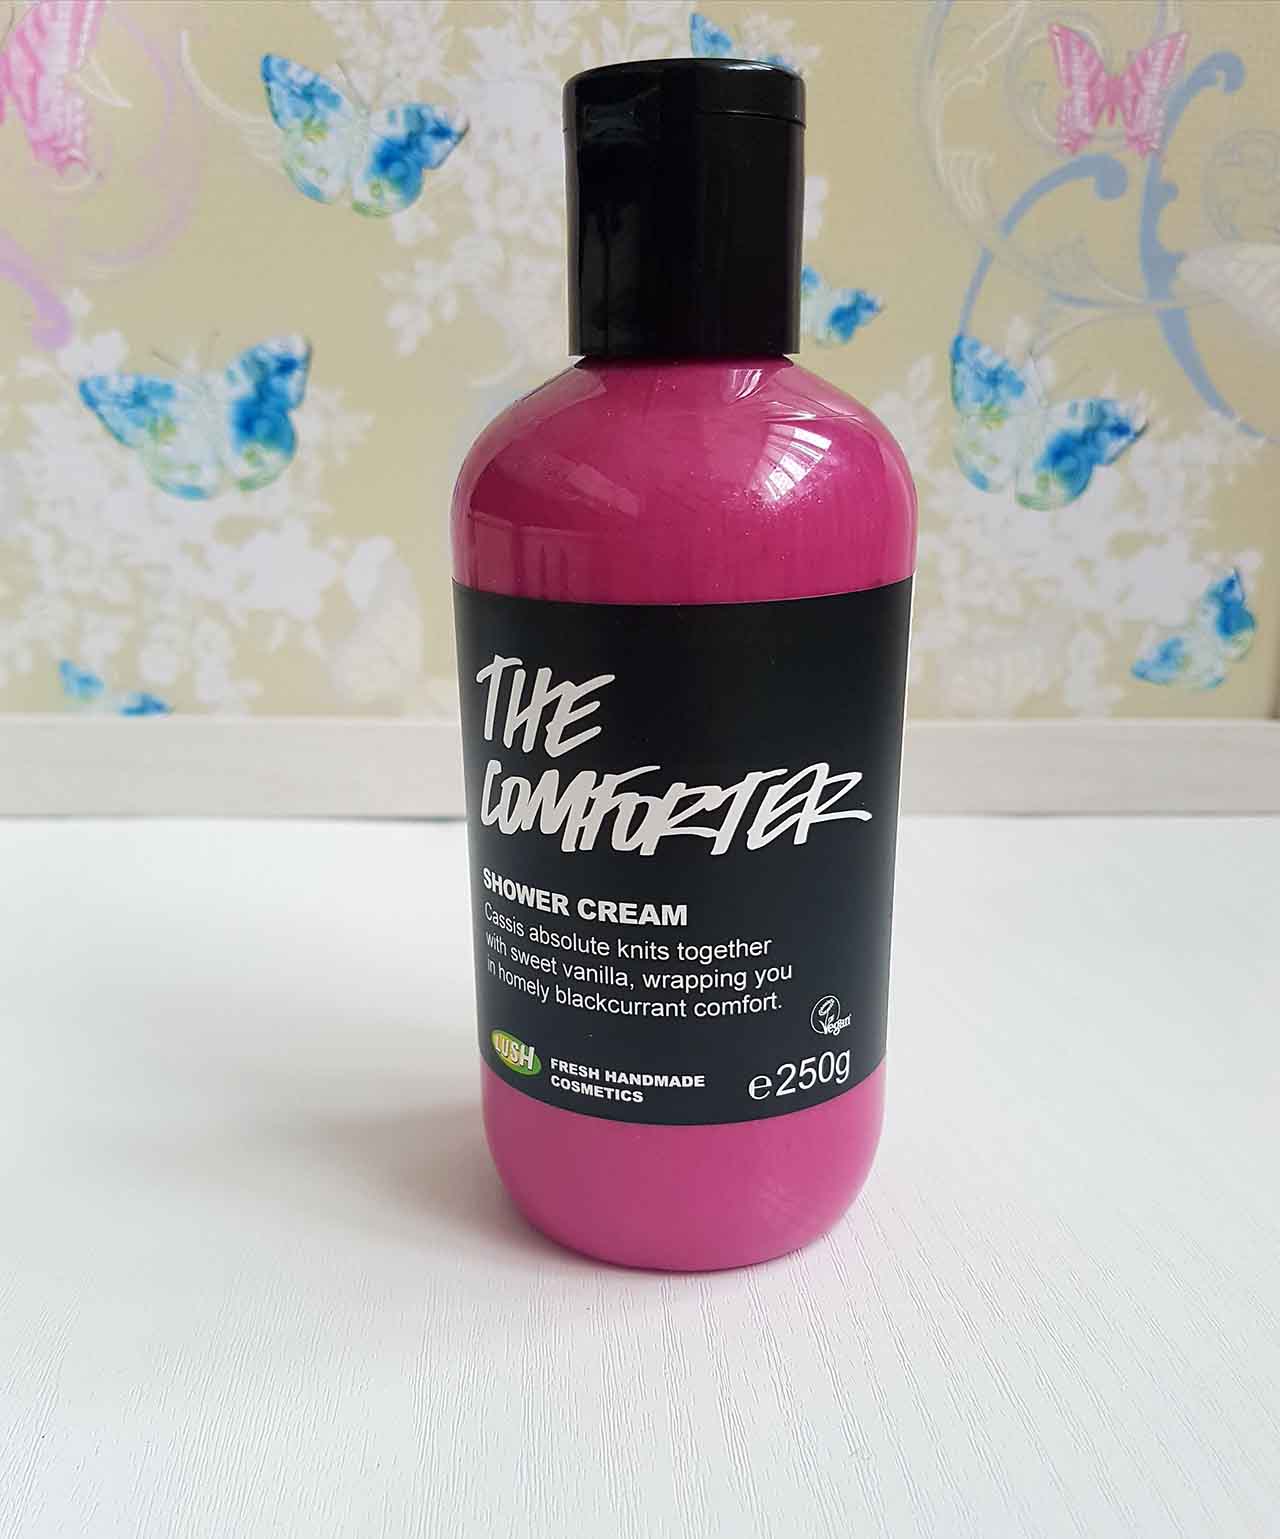 Lush Fresh Handmade Cosmetics – How Lush Are They: The Comforter Shower Cream - This is by far one of my favourite products! It smells divine and has a shimmer in the fluid which calls to the magpie in me! It contains Cassis Absolute (Blackcurrent), Vanilla, almond oil and bergamot oil, all of which combined create an amazing scent and colour and the cream feels silky on the skin. After use, my skin smelt great and felt soft and hydrated. I use this shower cream as a treat when I need a pampering!